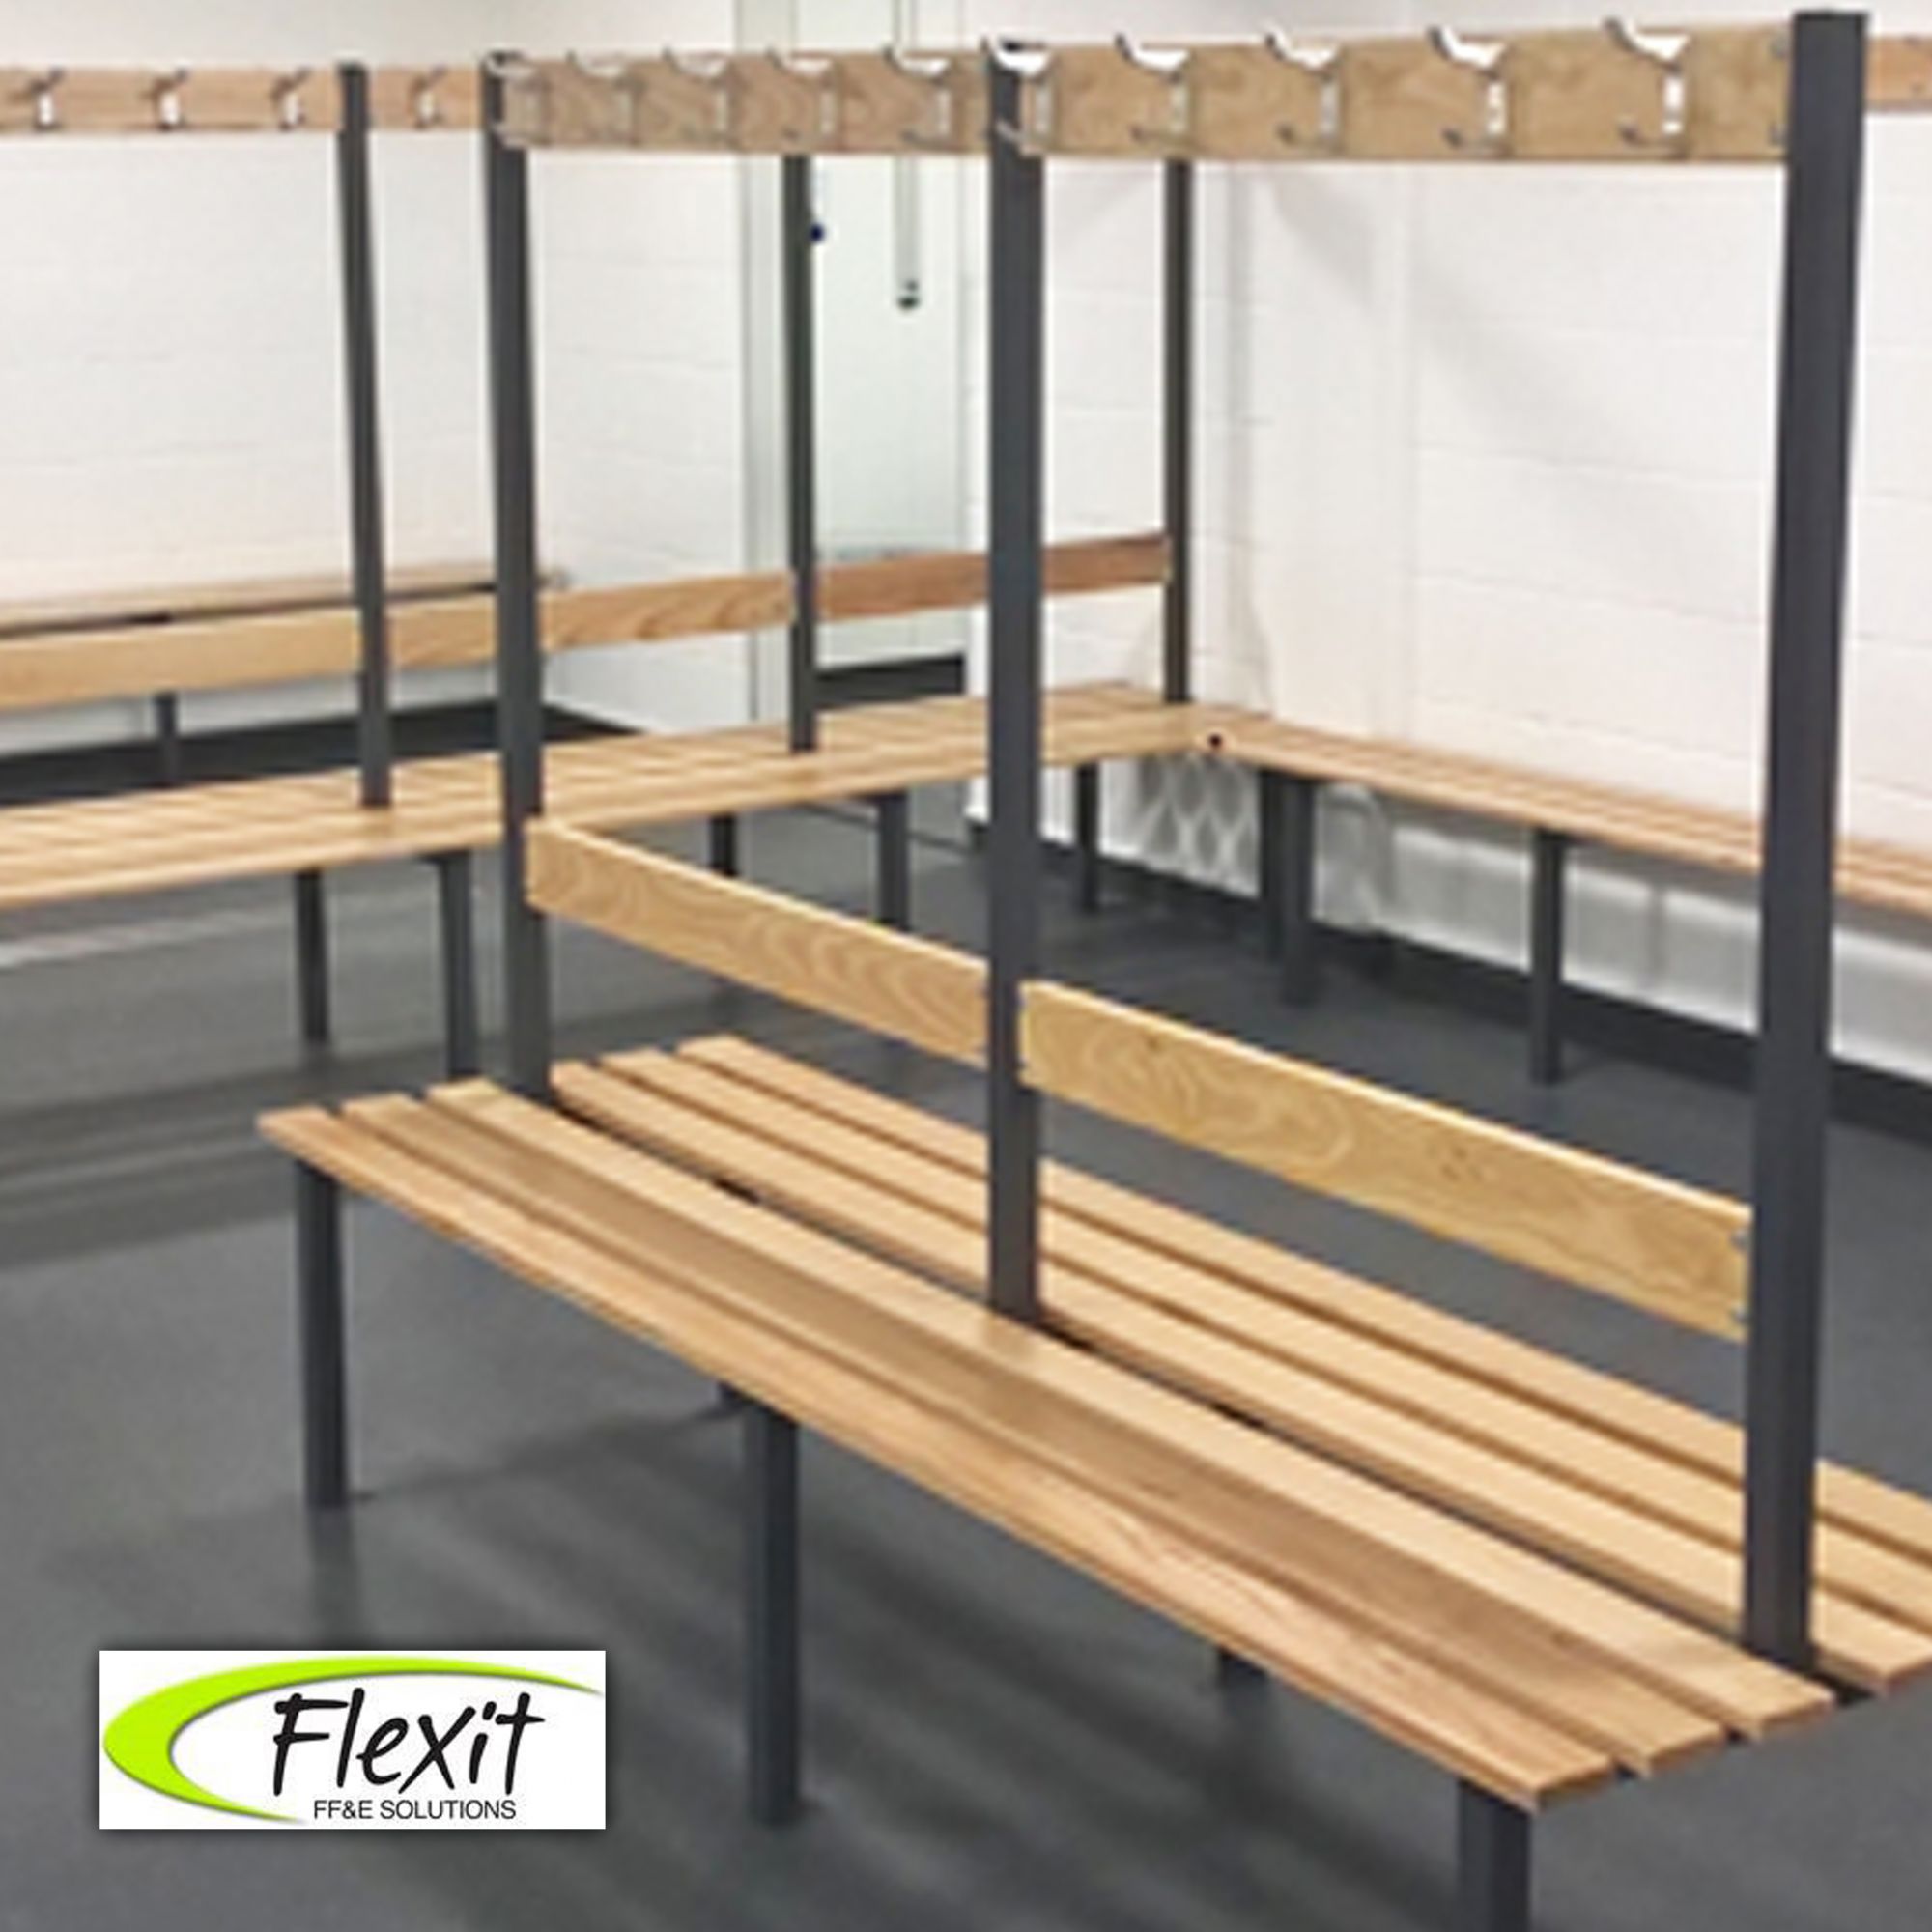 EXETER SCHOOL - CHANGING ROOM BENCHING